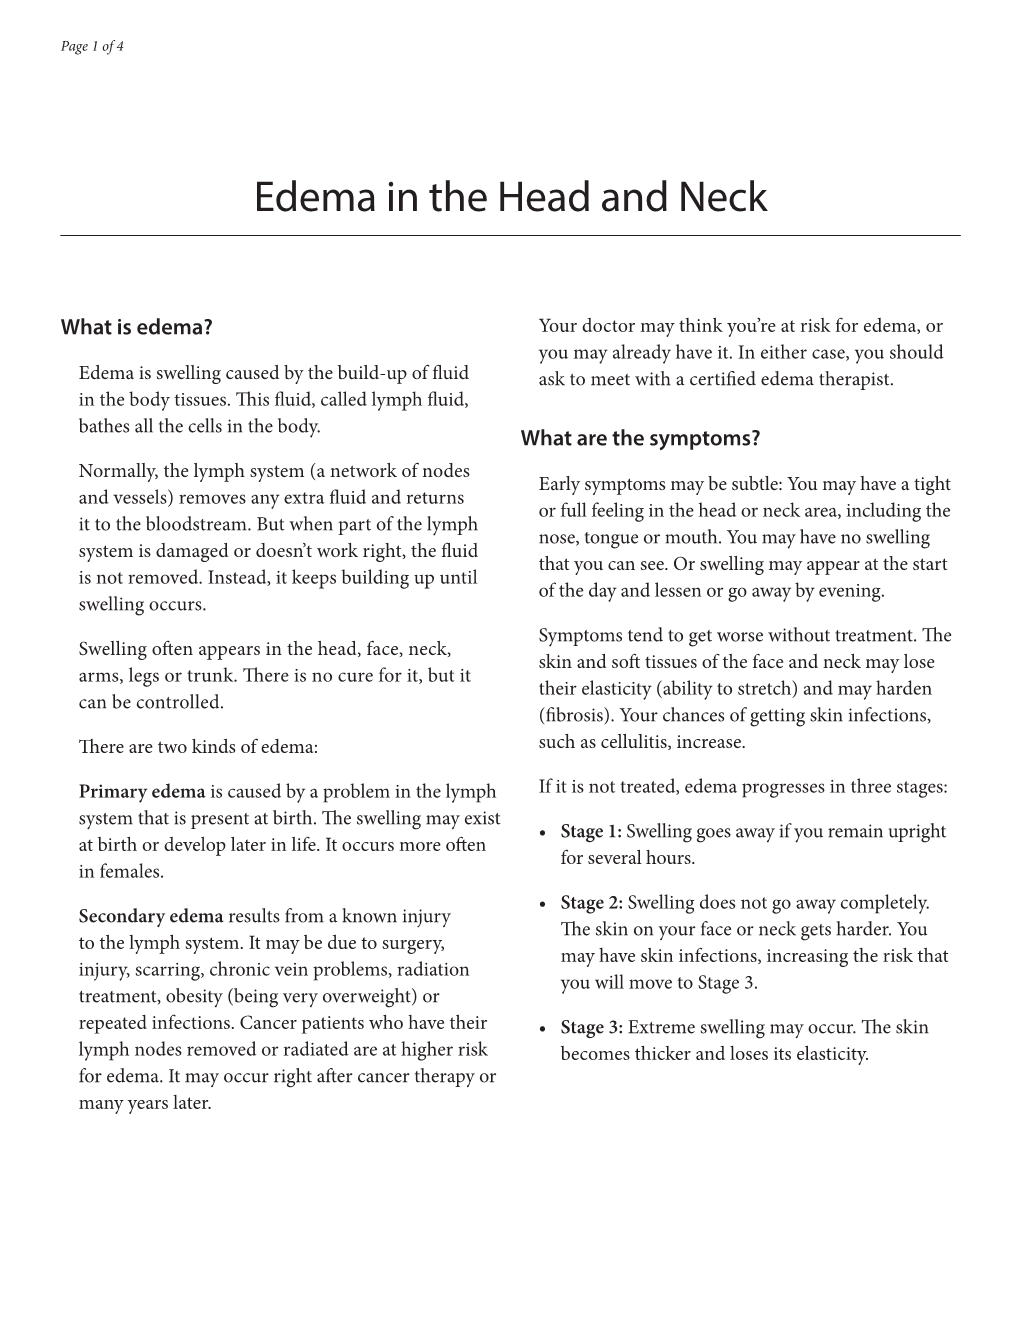 Edema in the Head and Neck